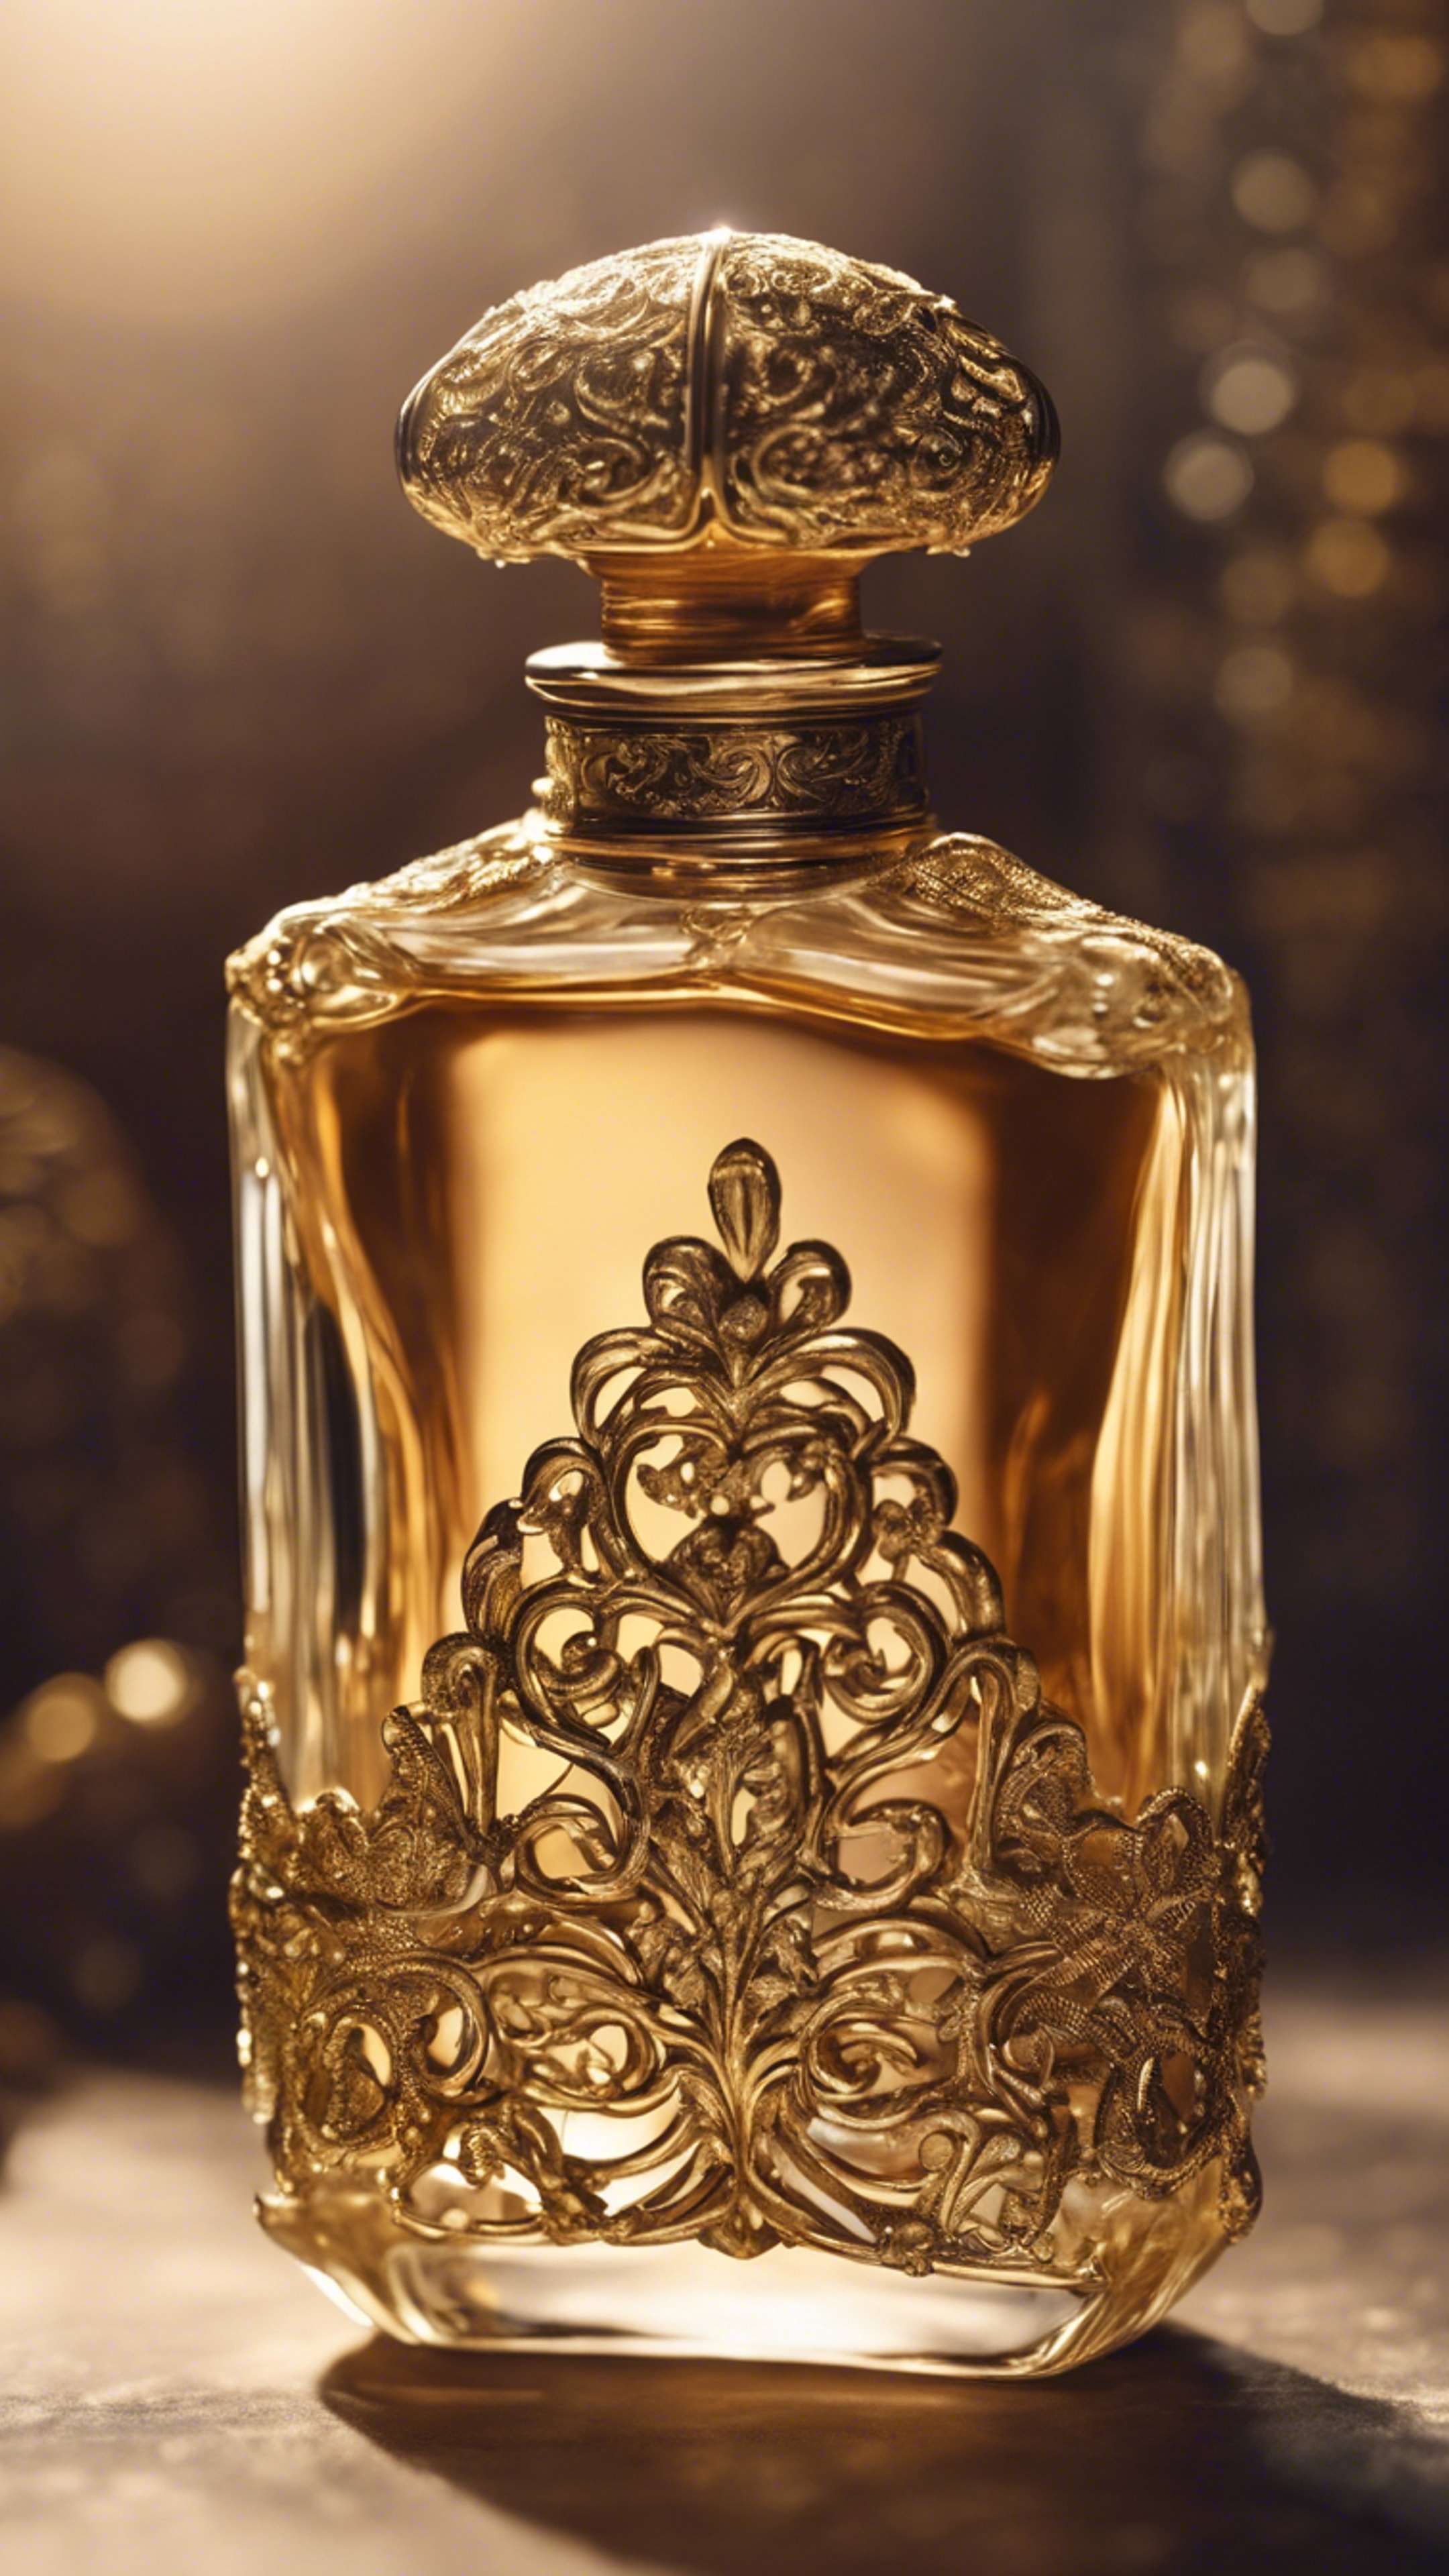 An antique perfume bottle with delicate gold filigree luxury cosmetic item. Hình nền[fe361f22190a4891a6d9]